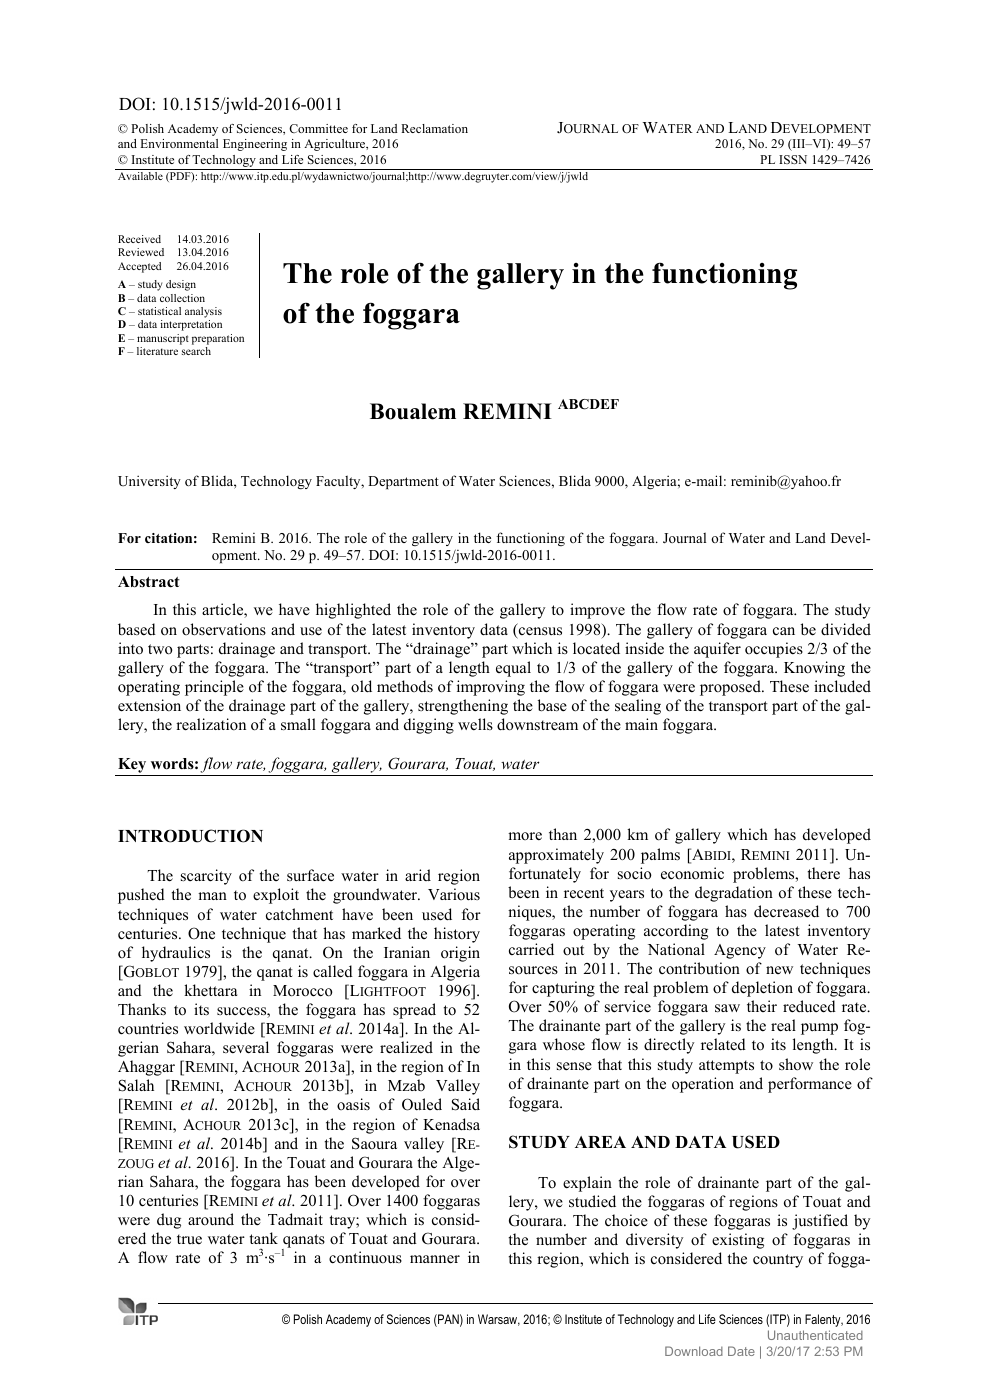 The Role Of The Gallery In The Functioning Of The Foggara Topic Of Research Paper In Civil Engineering Download Scholarly Article Pdf And Read For Free On Cyberleninka Open Science Hub